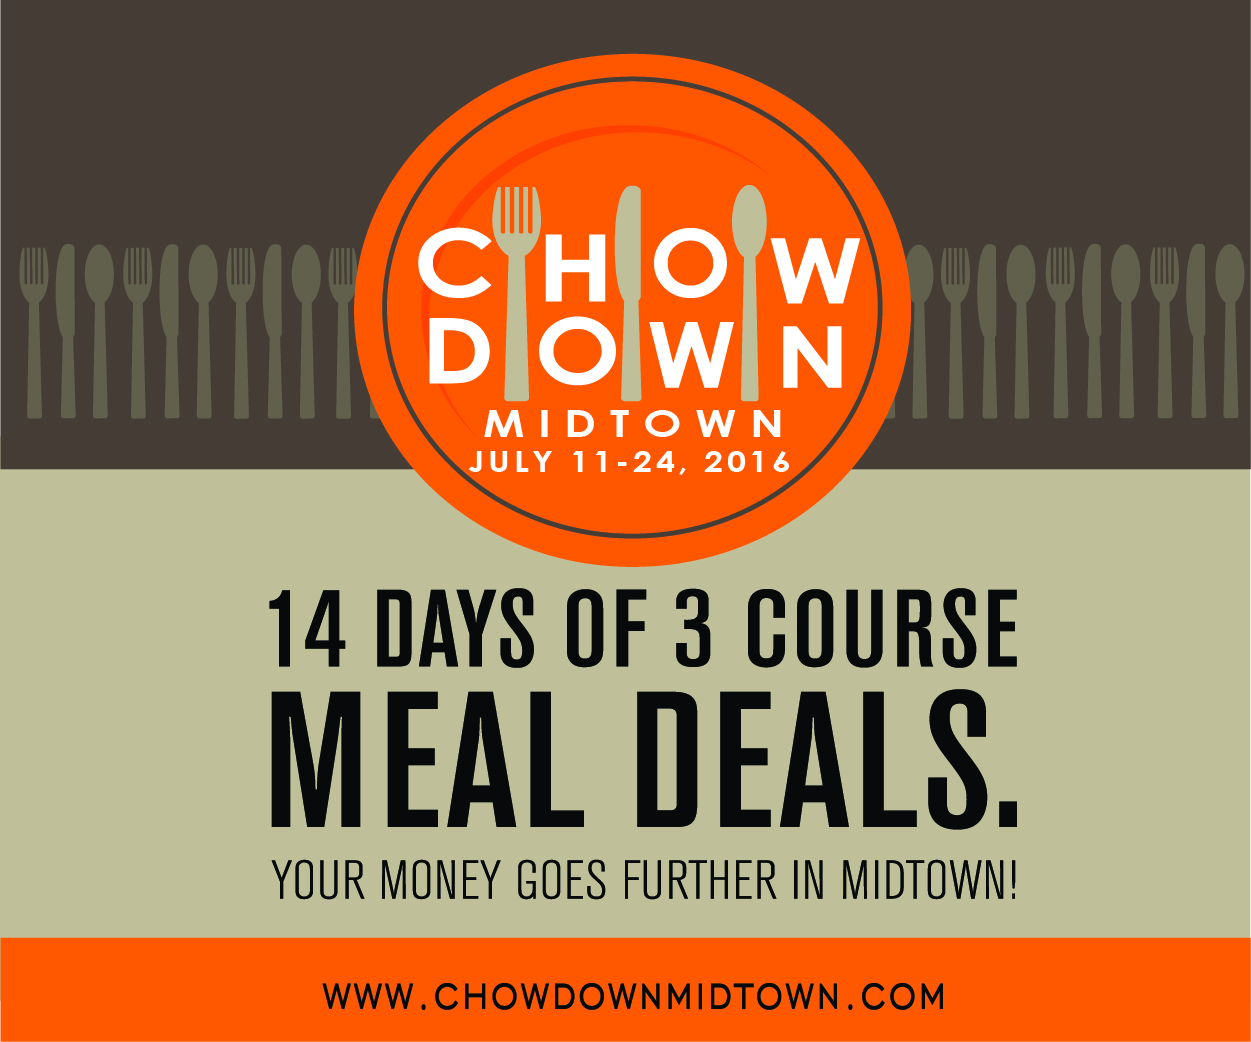 CHOW DOWN MIDTOWN DINING JULY 11 - 24